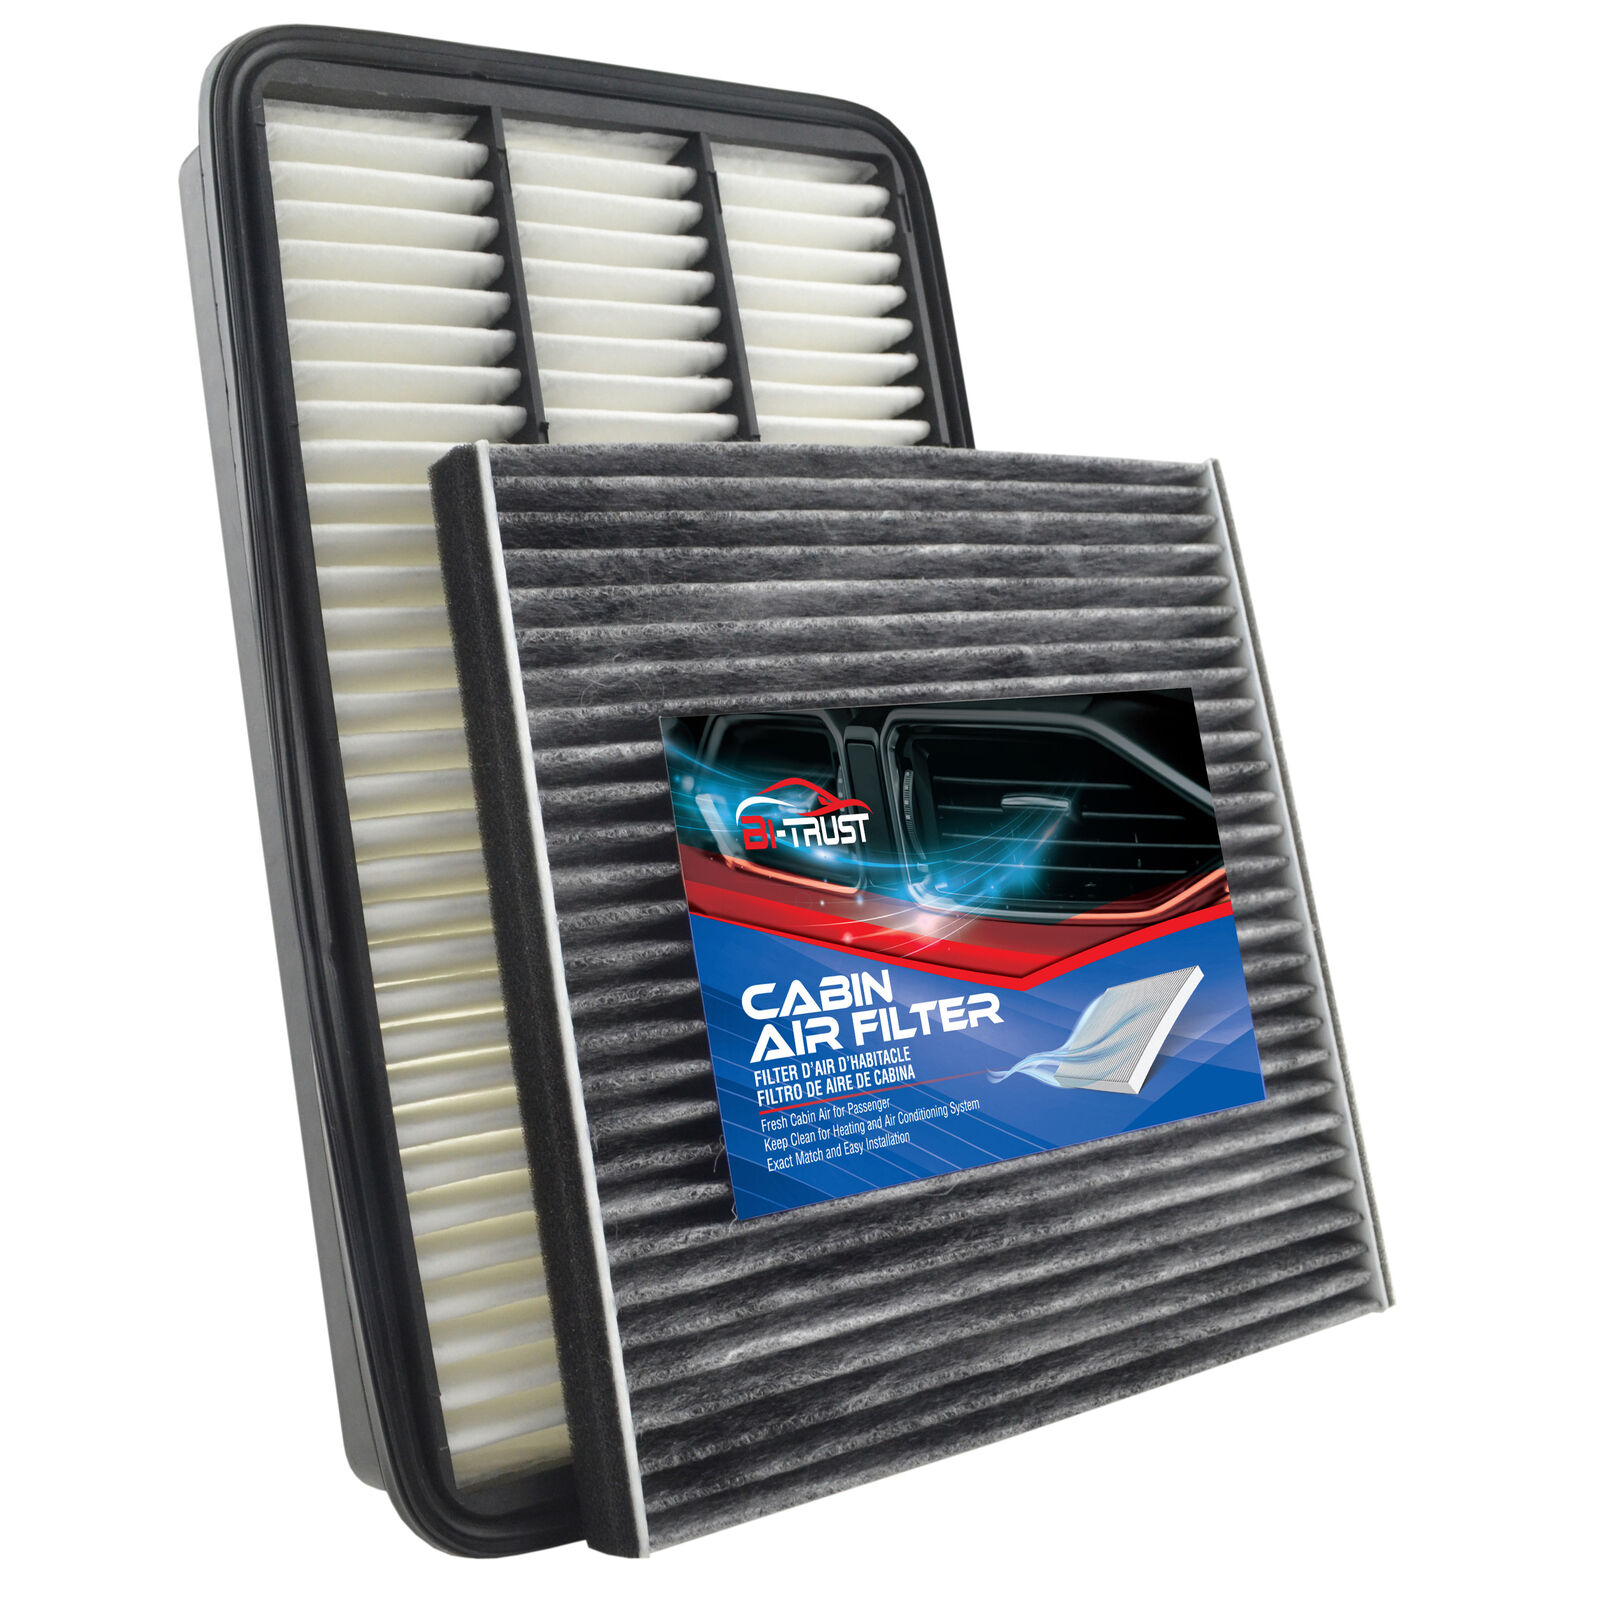 Engine & Cabin Air Filter Combo Set for Toyota Avalon 2000-2004 3.0L 87139-32010